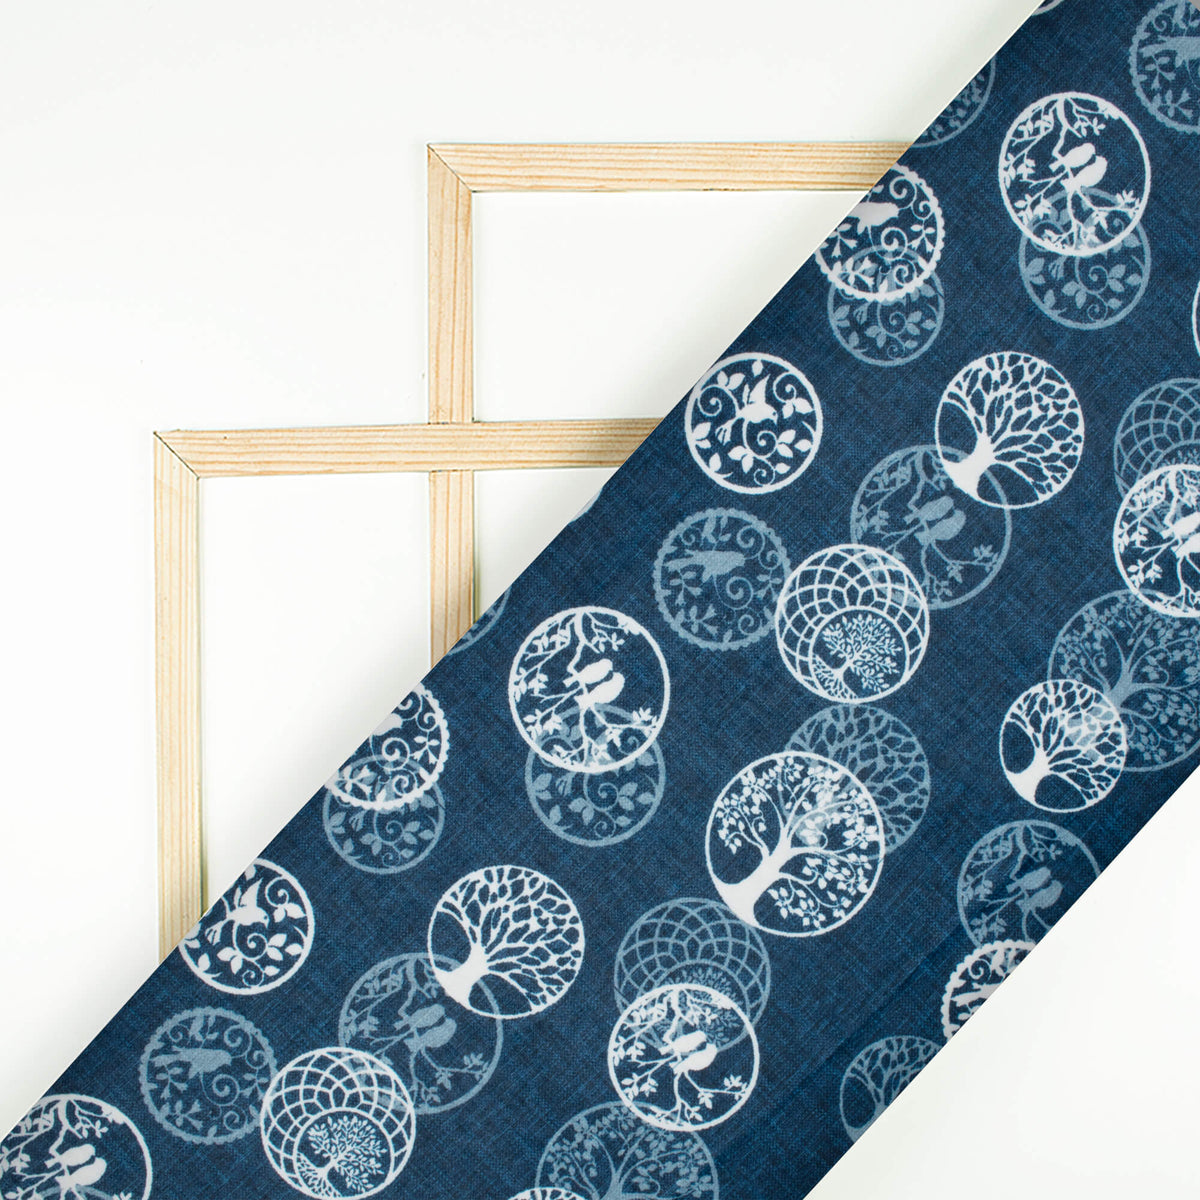 Prussian Blue And White Quirky Pattern Digital Print Lush Satin Fabric